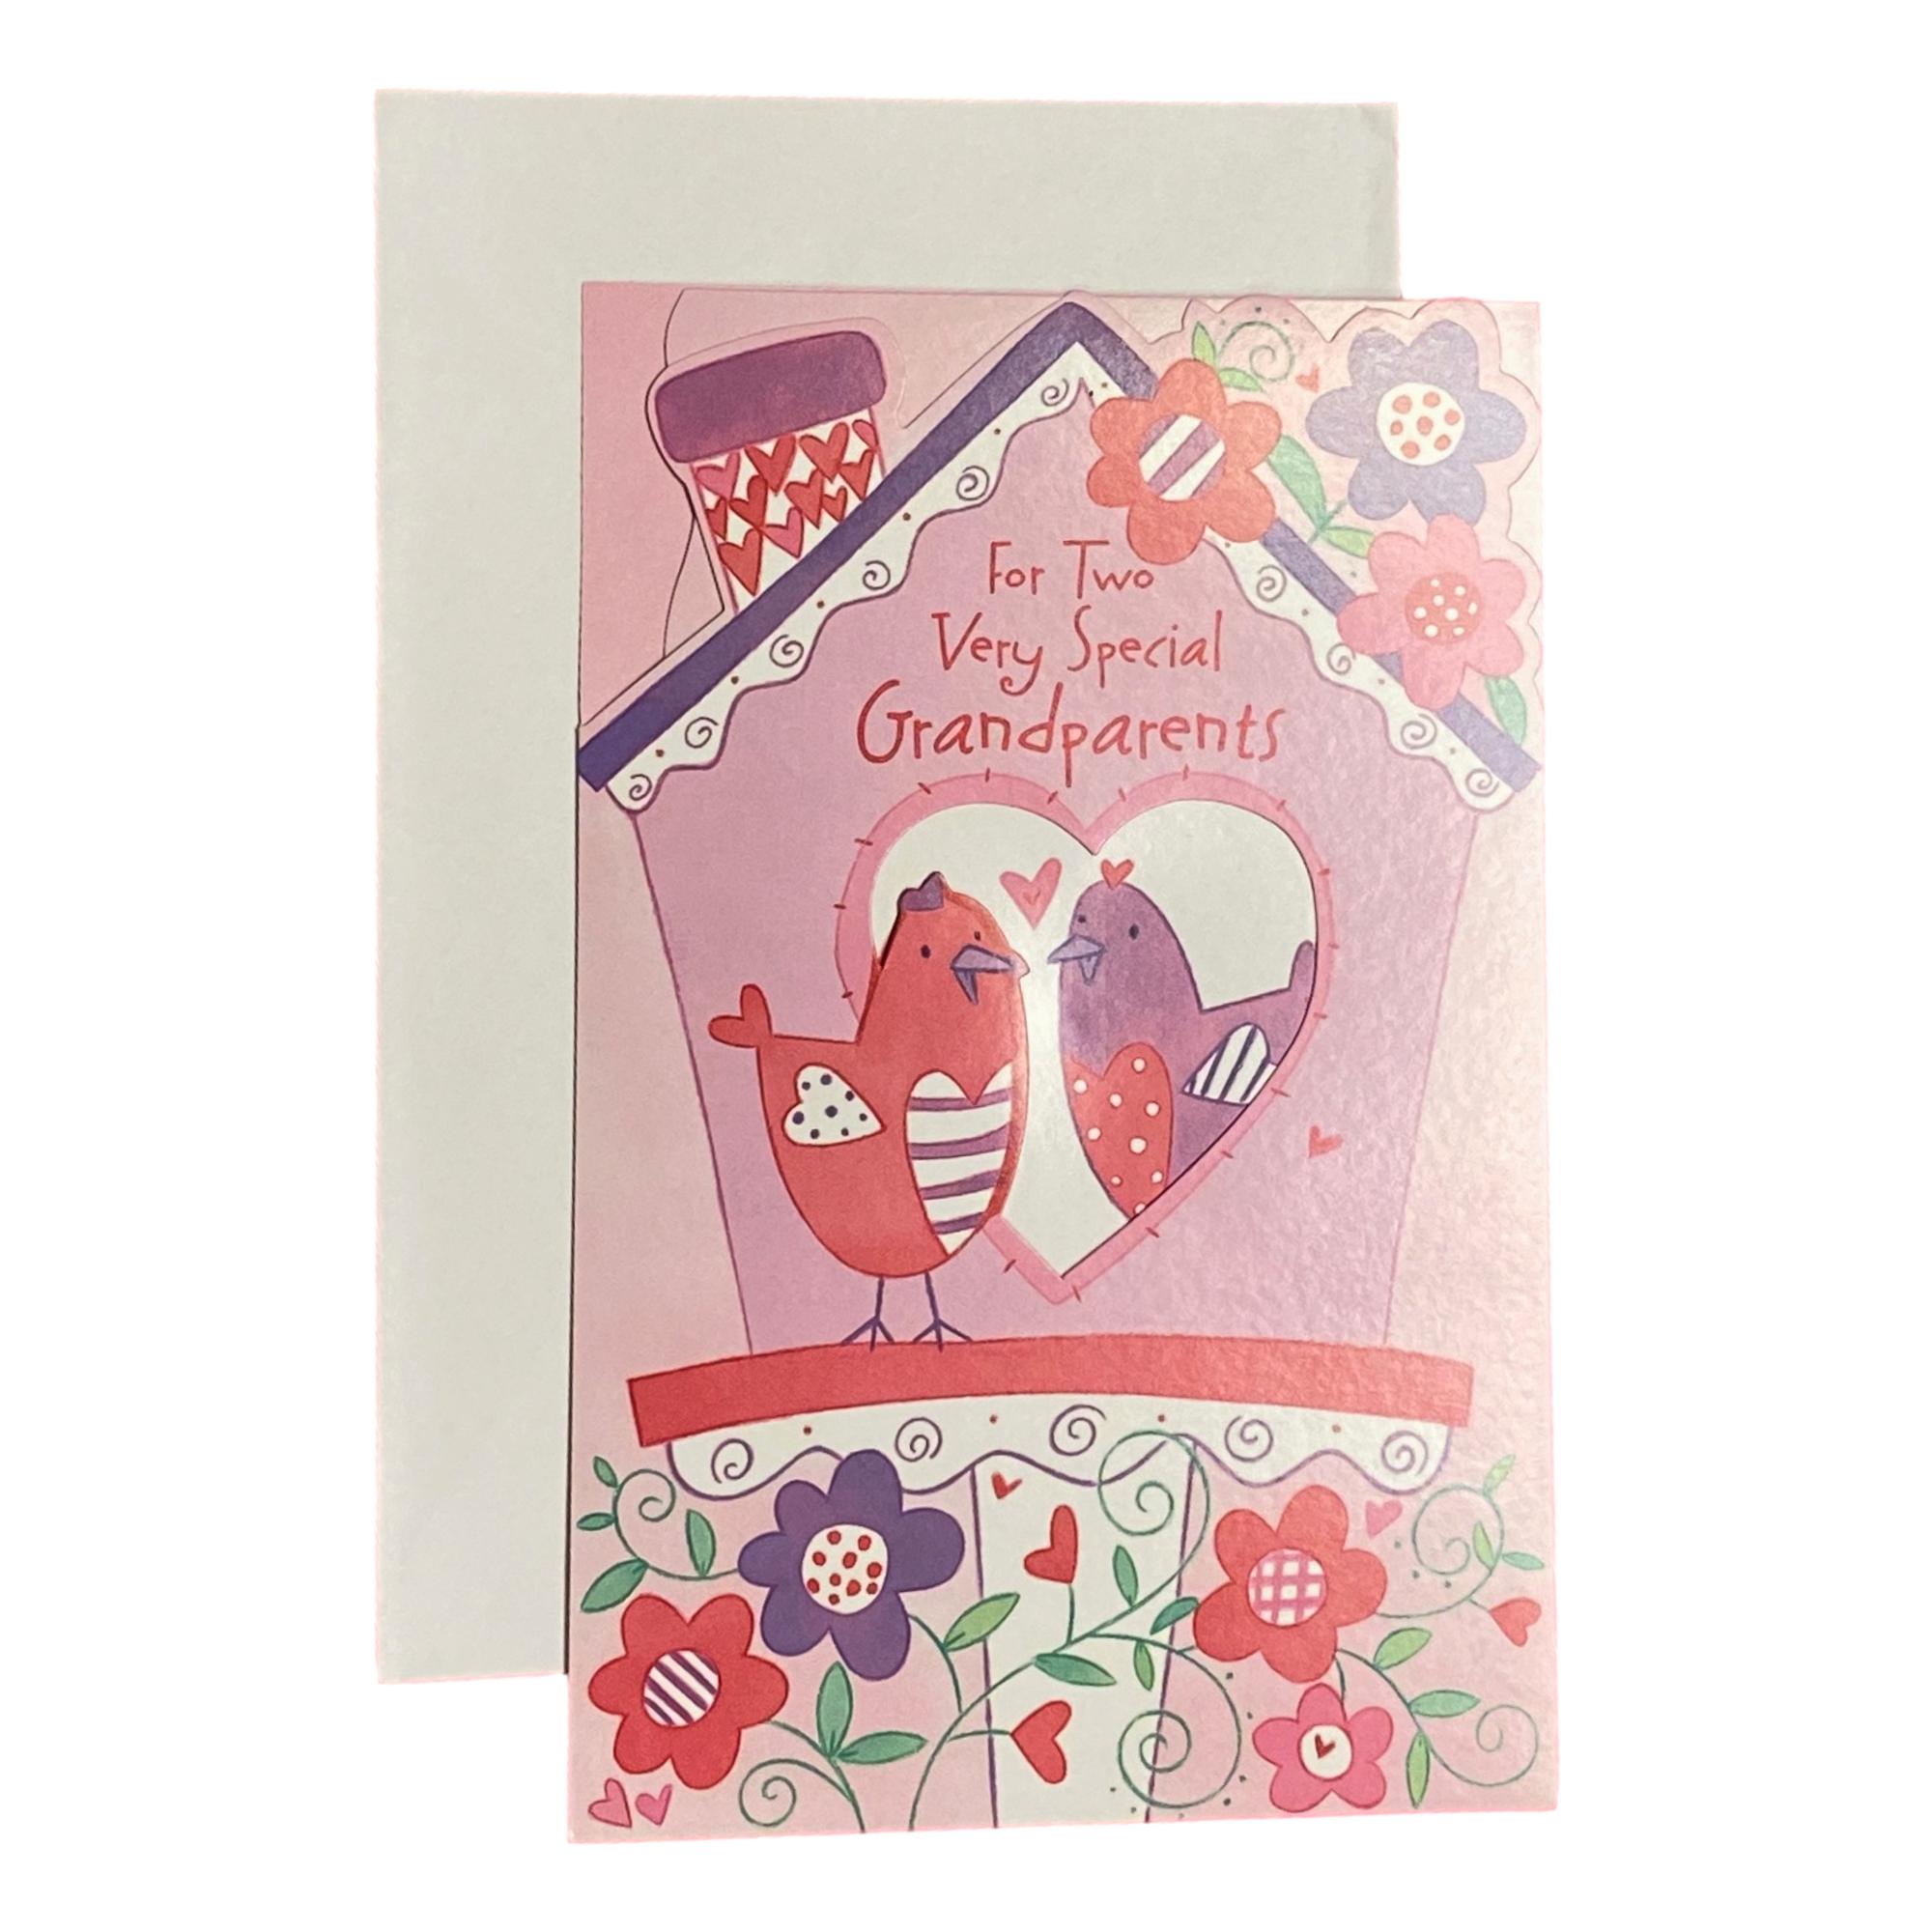 Valentines Day Greeting Card For Grandparents For Two Very Special